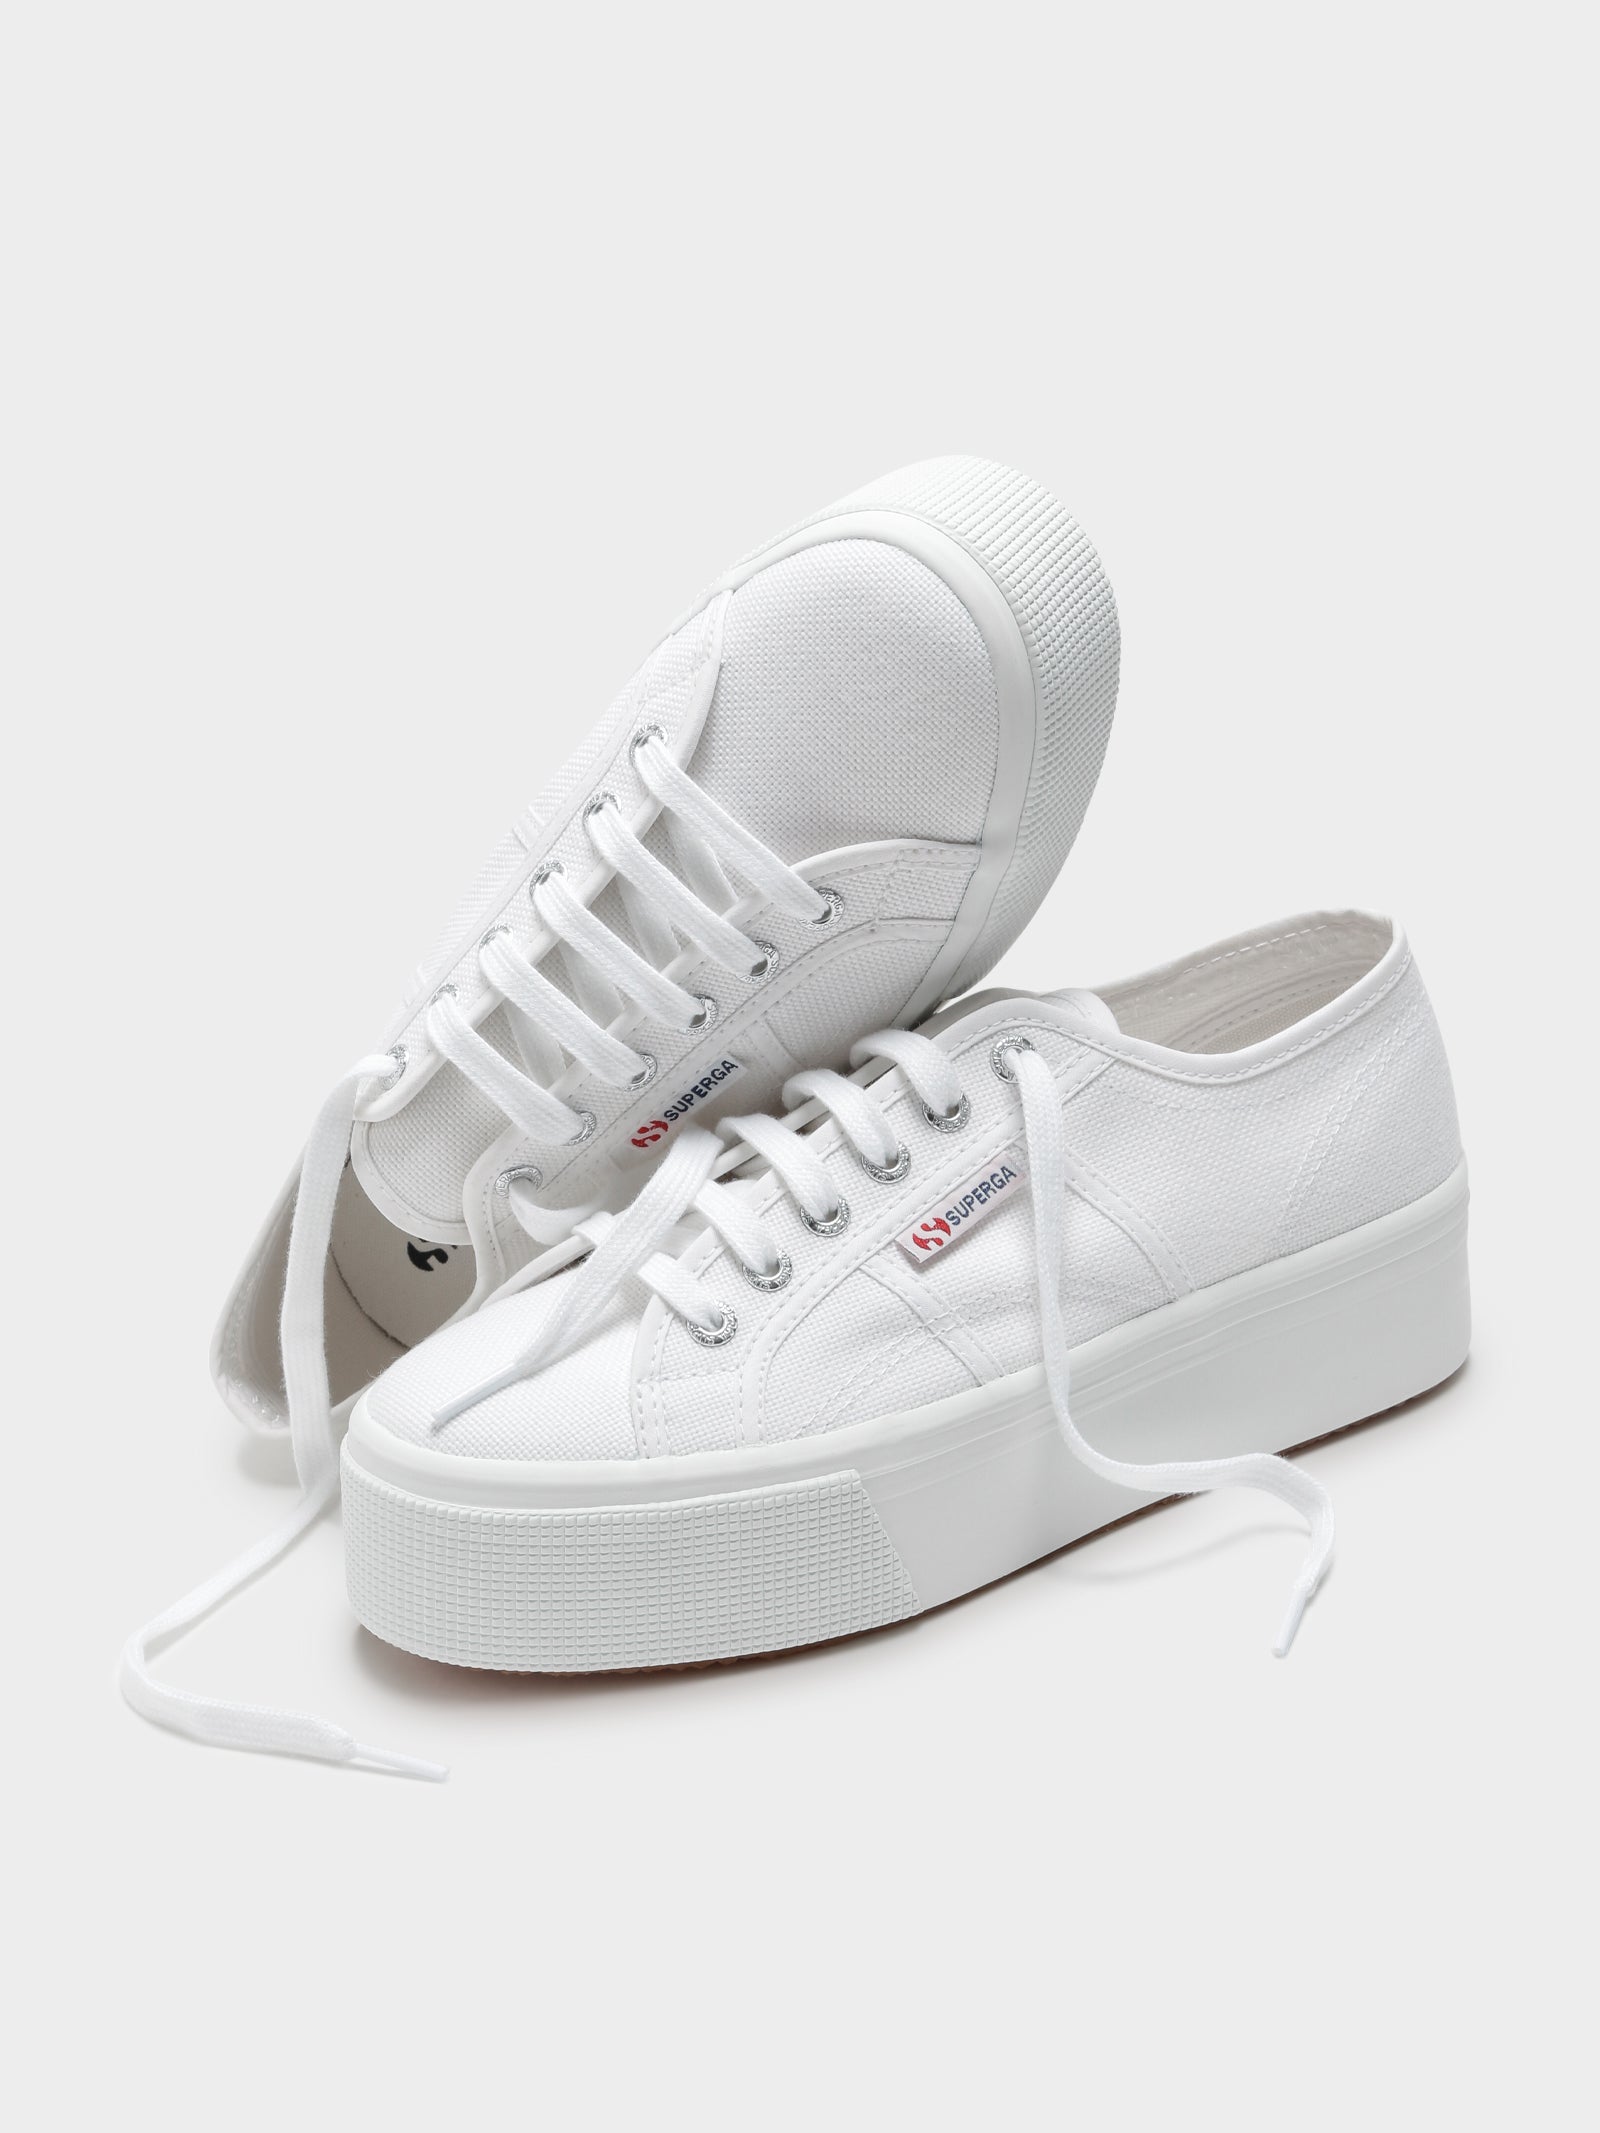 Womens 2790 Linea Up and Down Platform Sneakers in White